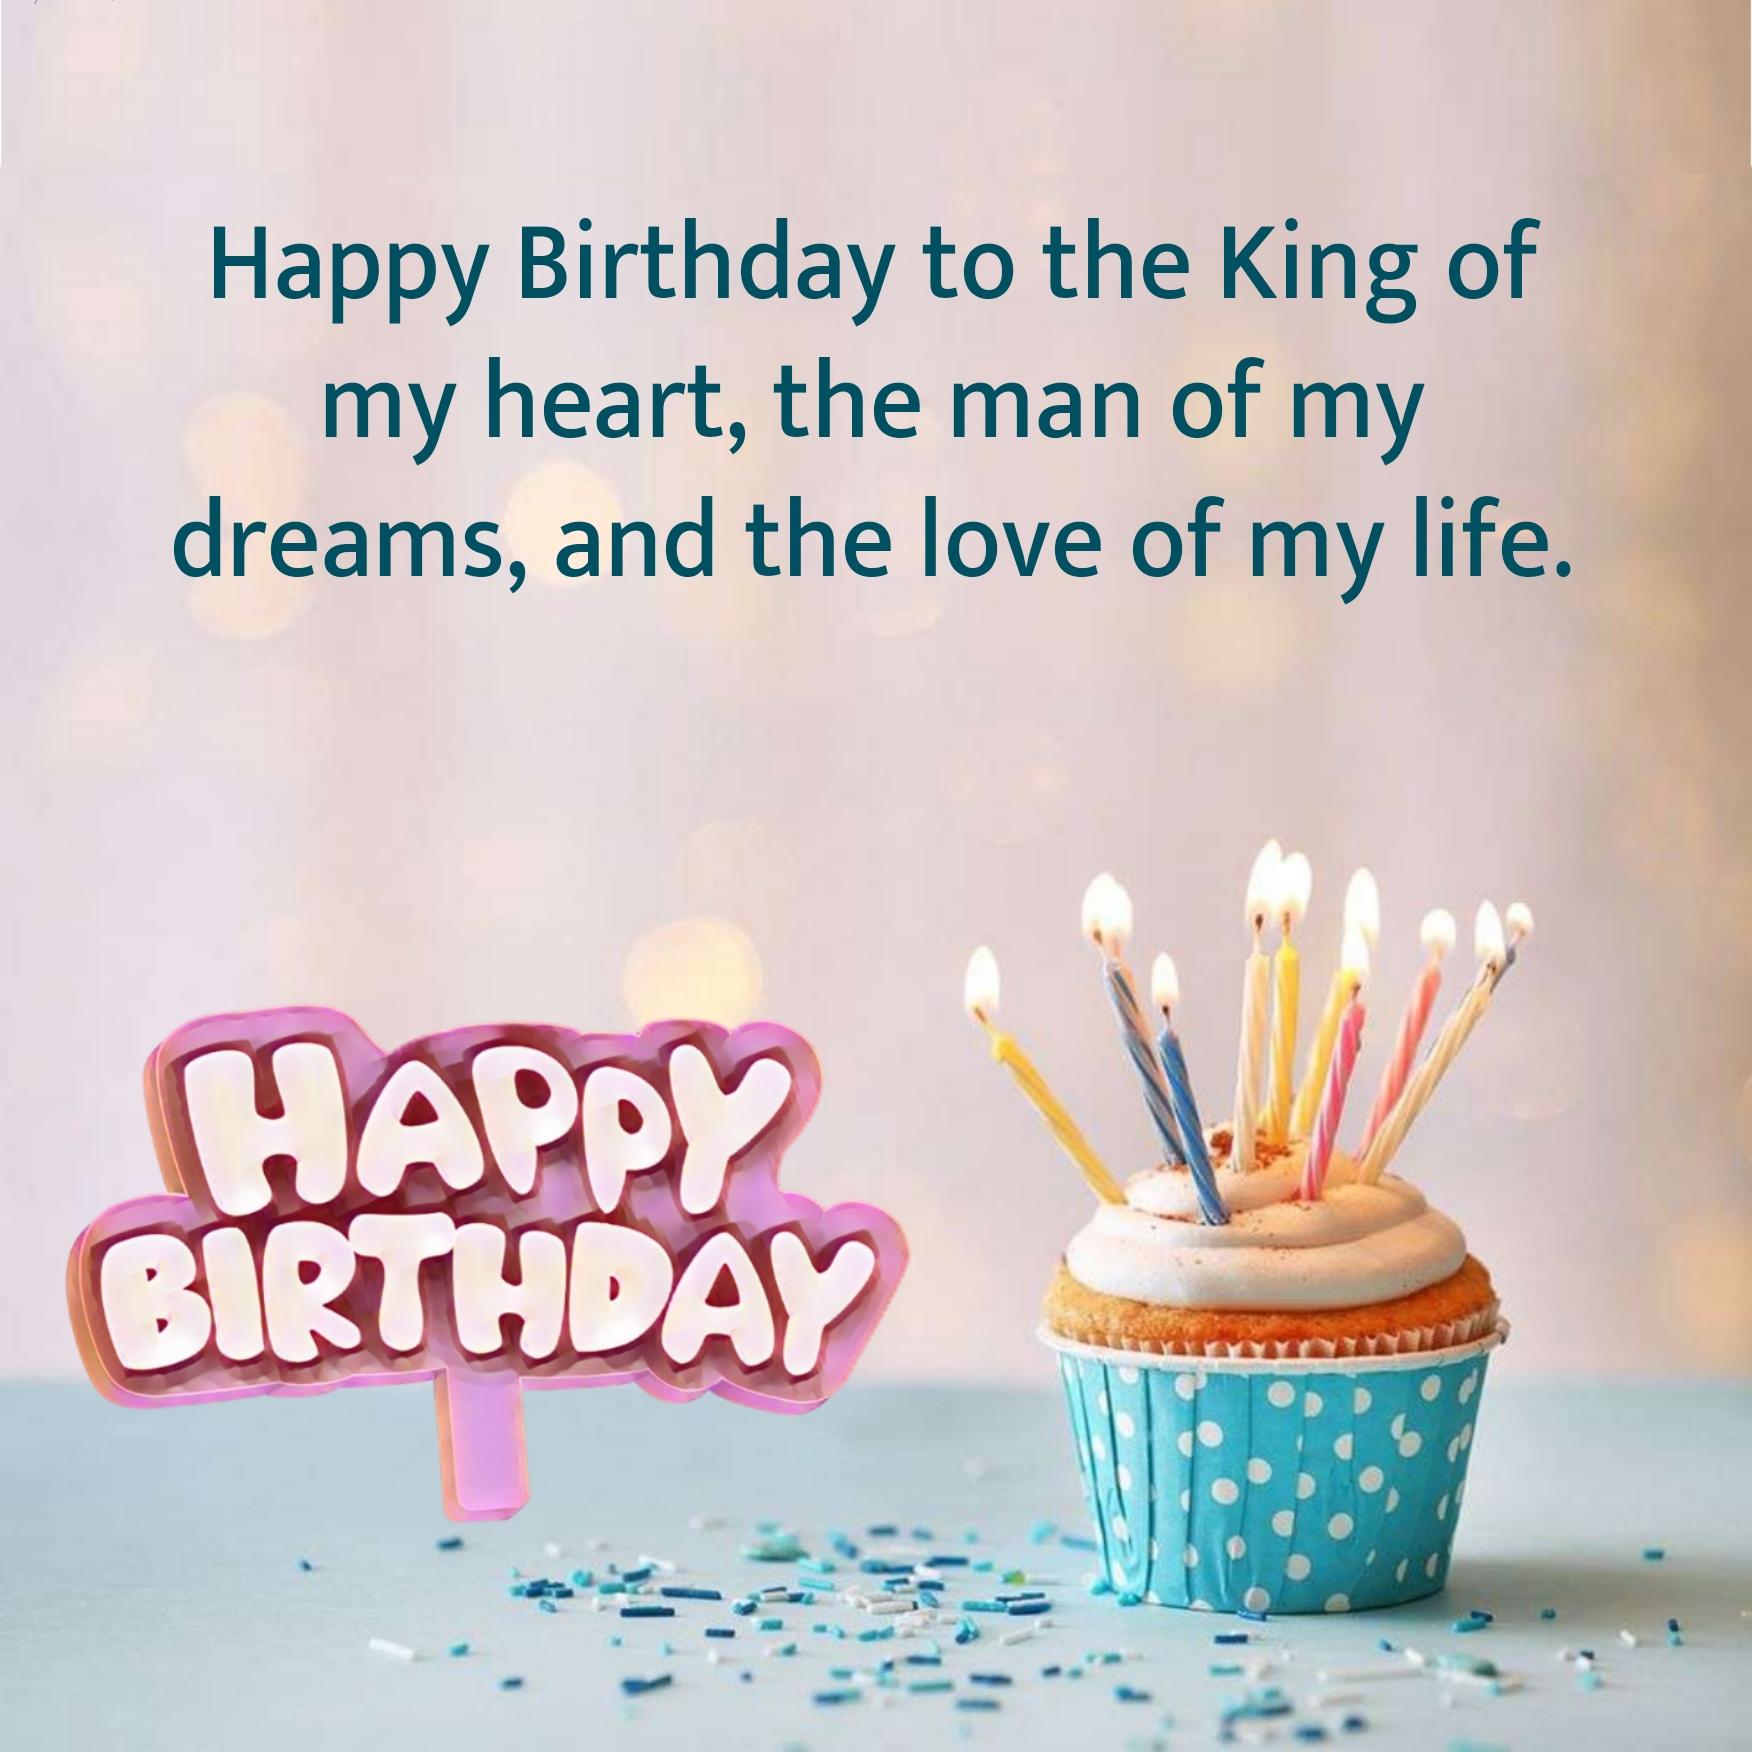 Happy Birthday to the King of my heart the man of my dreams